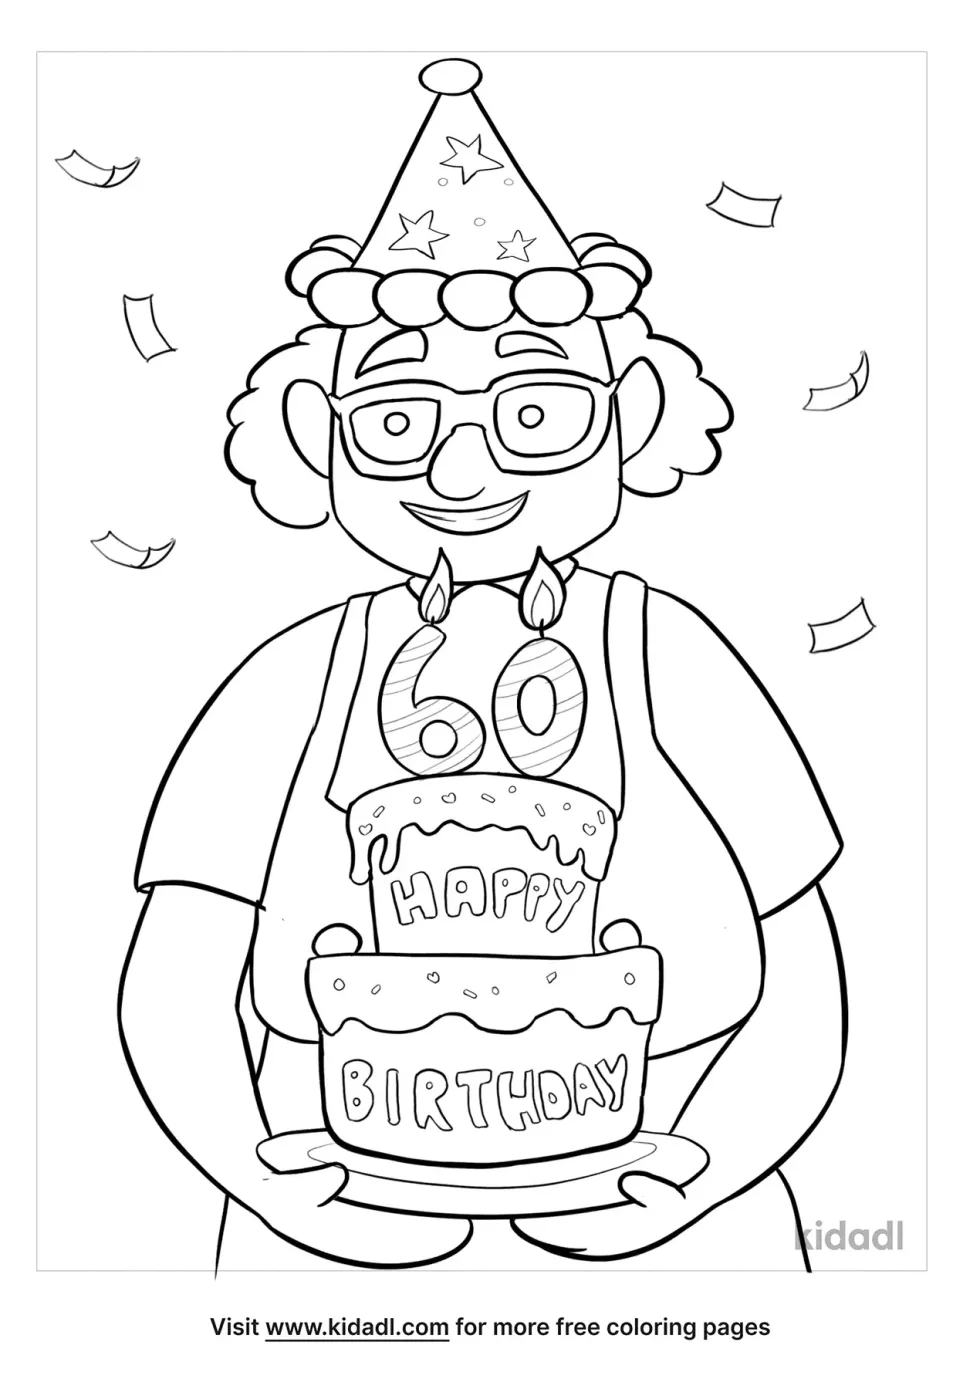 60th Birthday Coloring Page